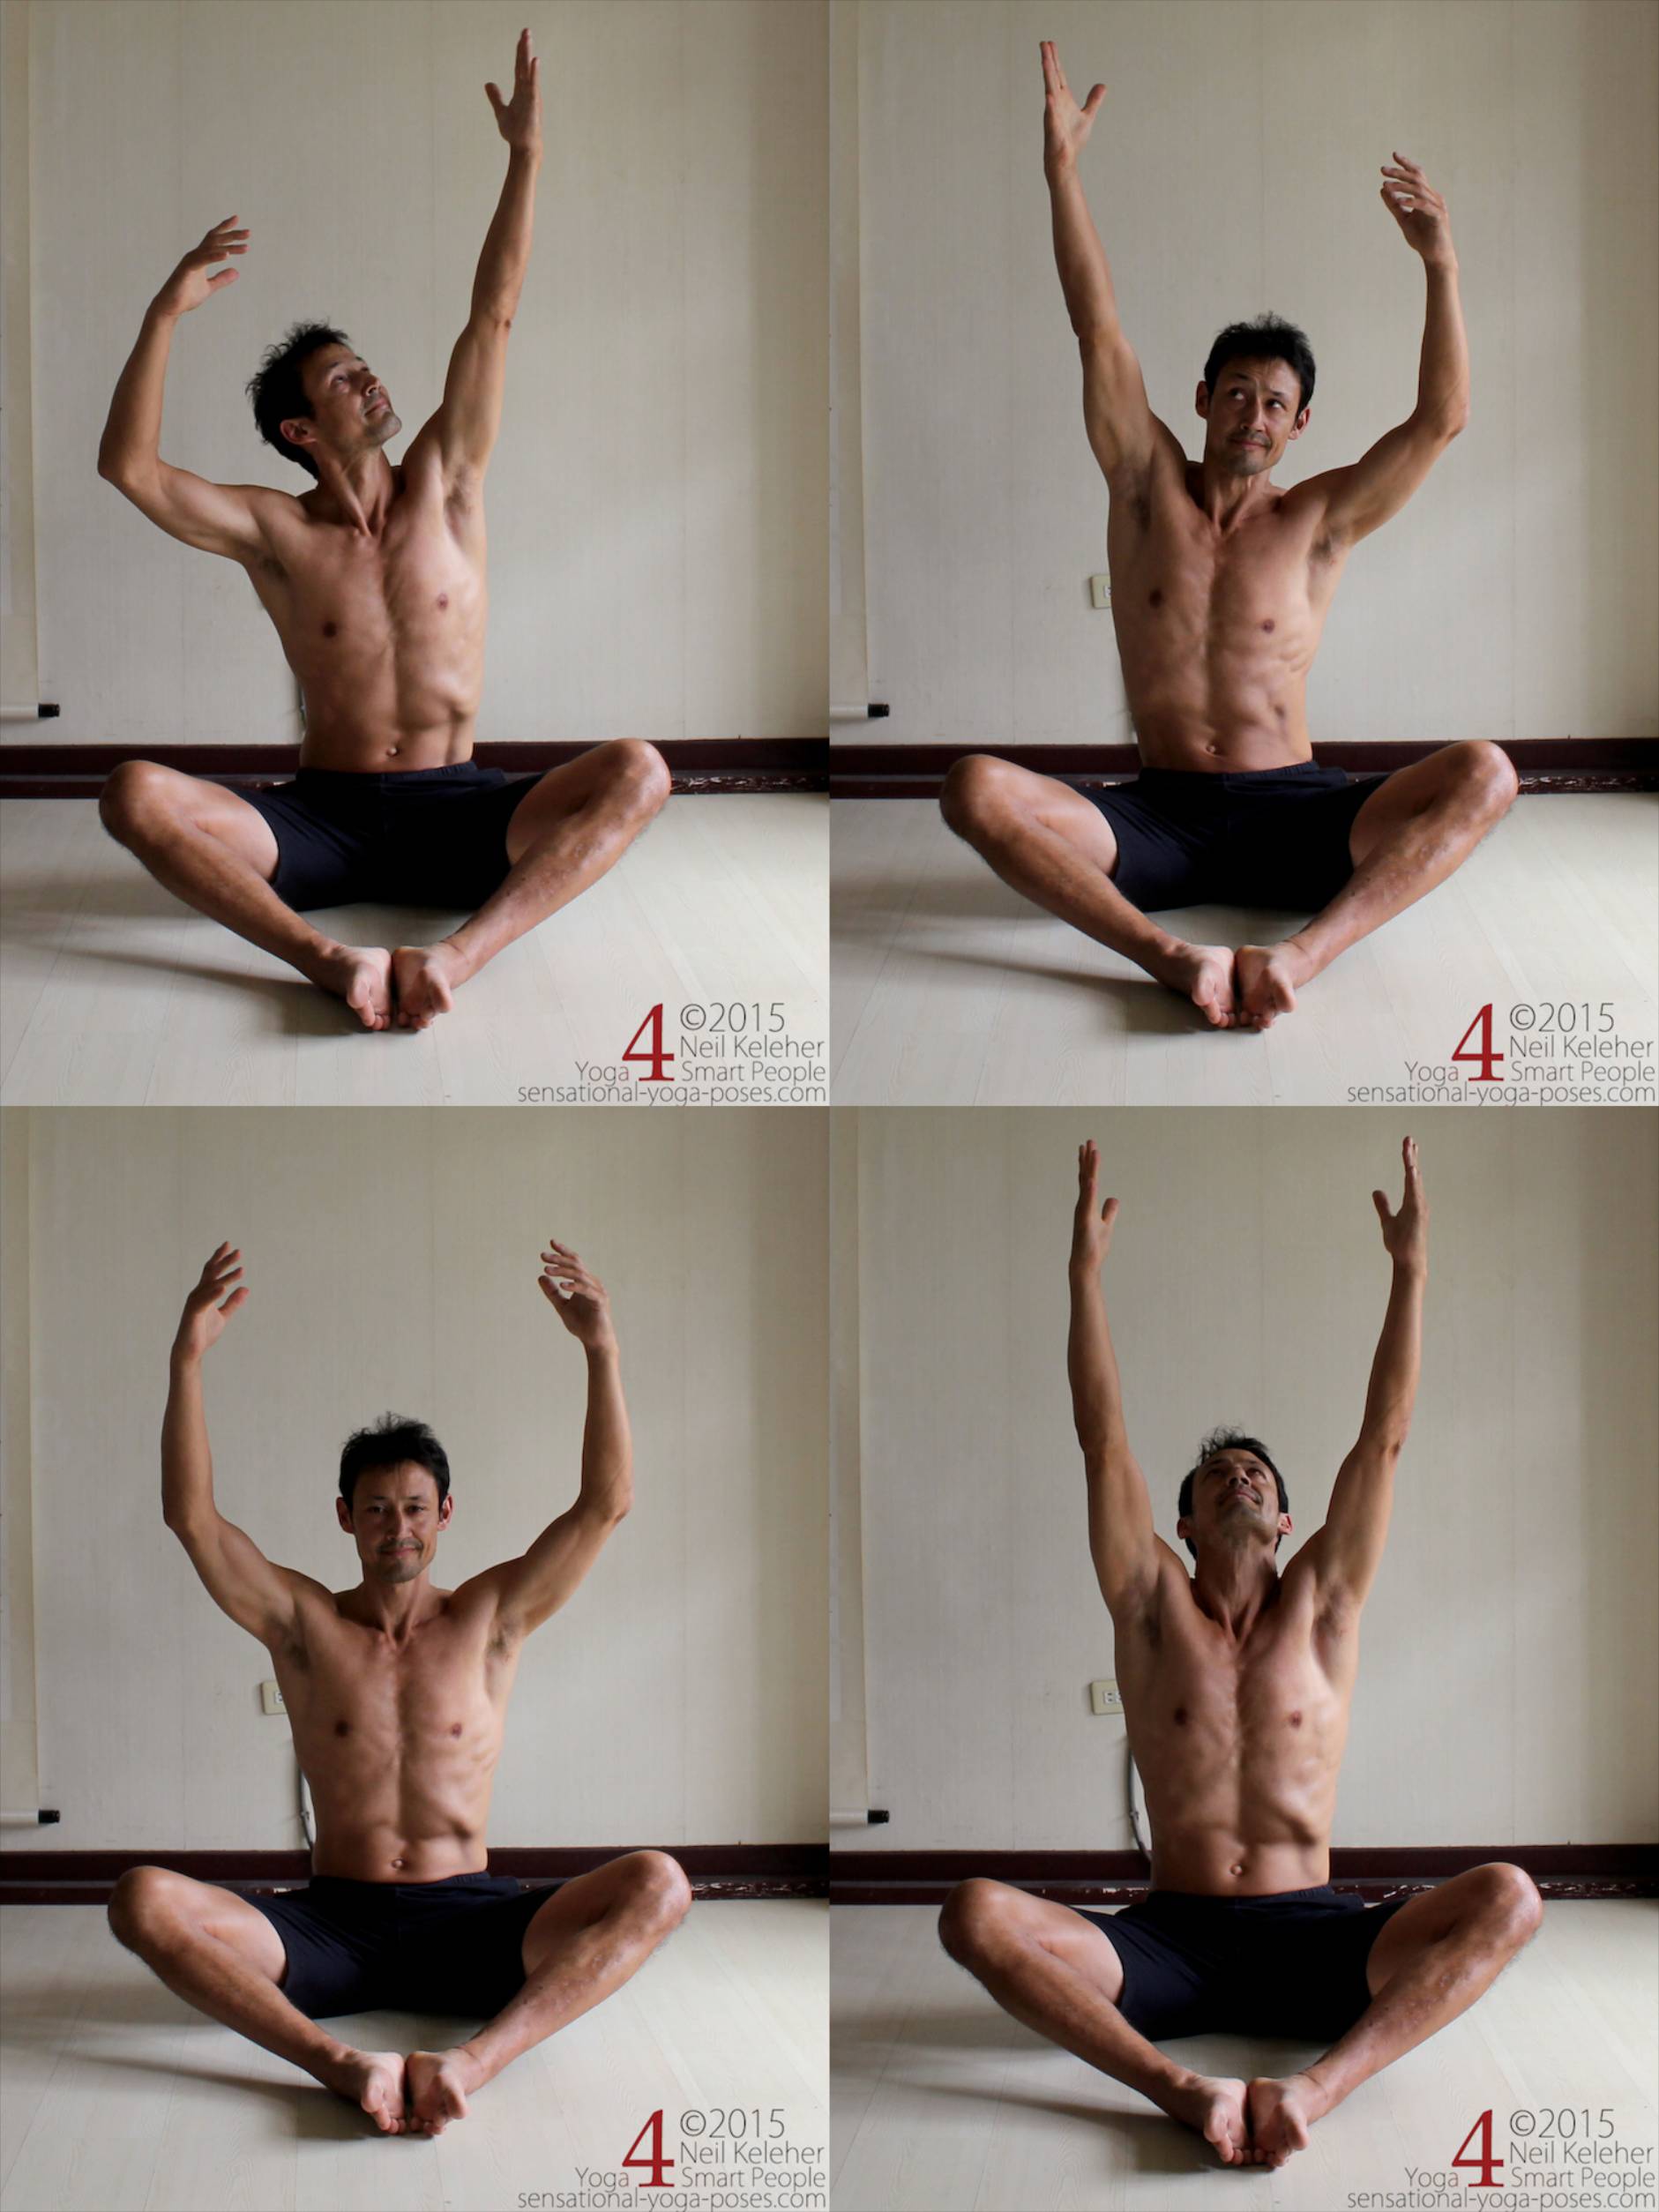 Top: Reach with one arm. Bottom: Reach with both arms.